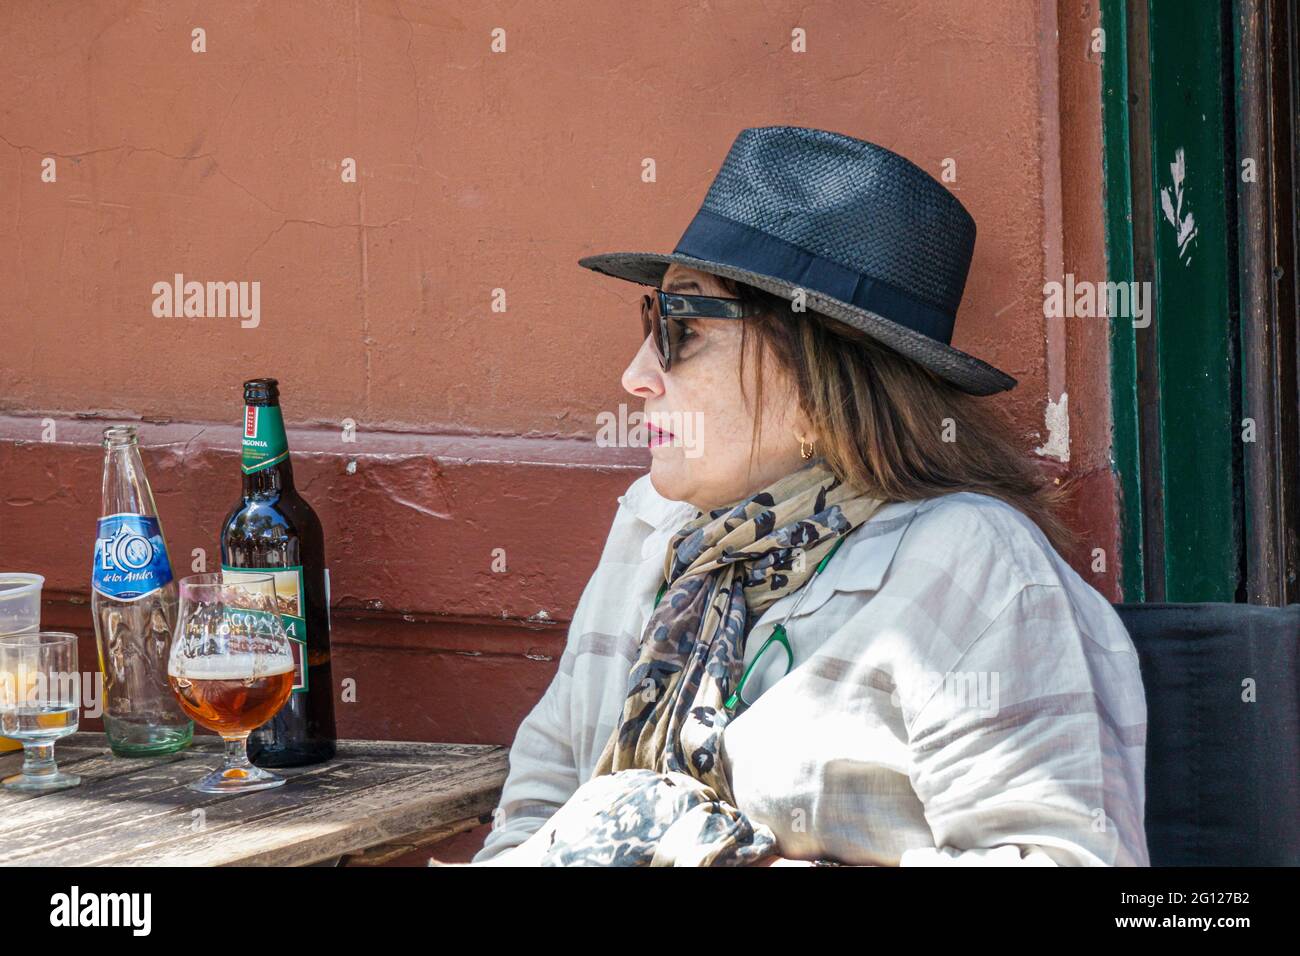 Argentina Buenos Aires San Telmo Plaza Dorrego outdoor cafe table Hispanic woman wearing hat fedora sunglasses drinking beer bottle glass Stock Photo